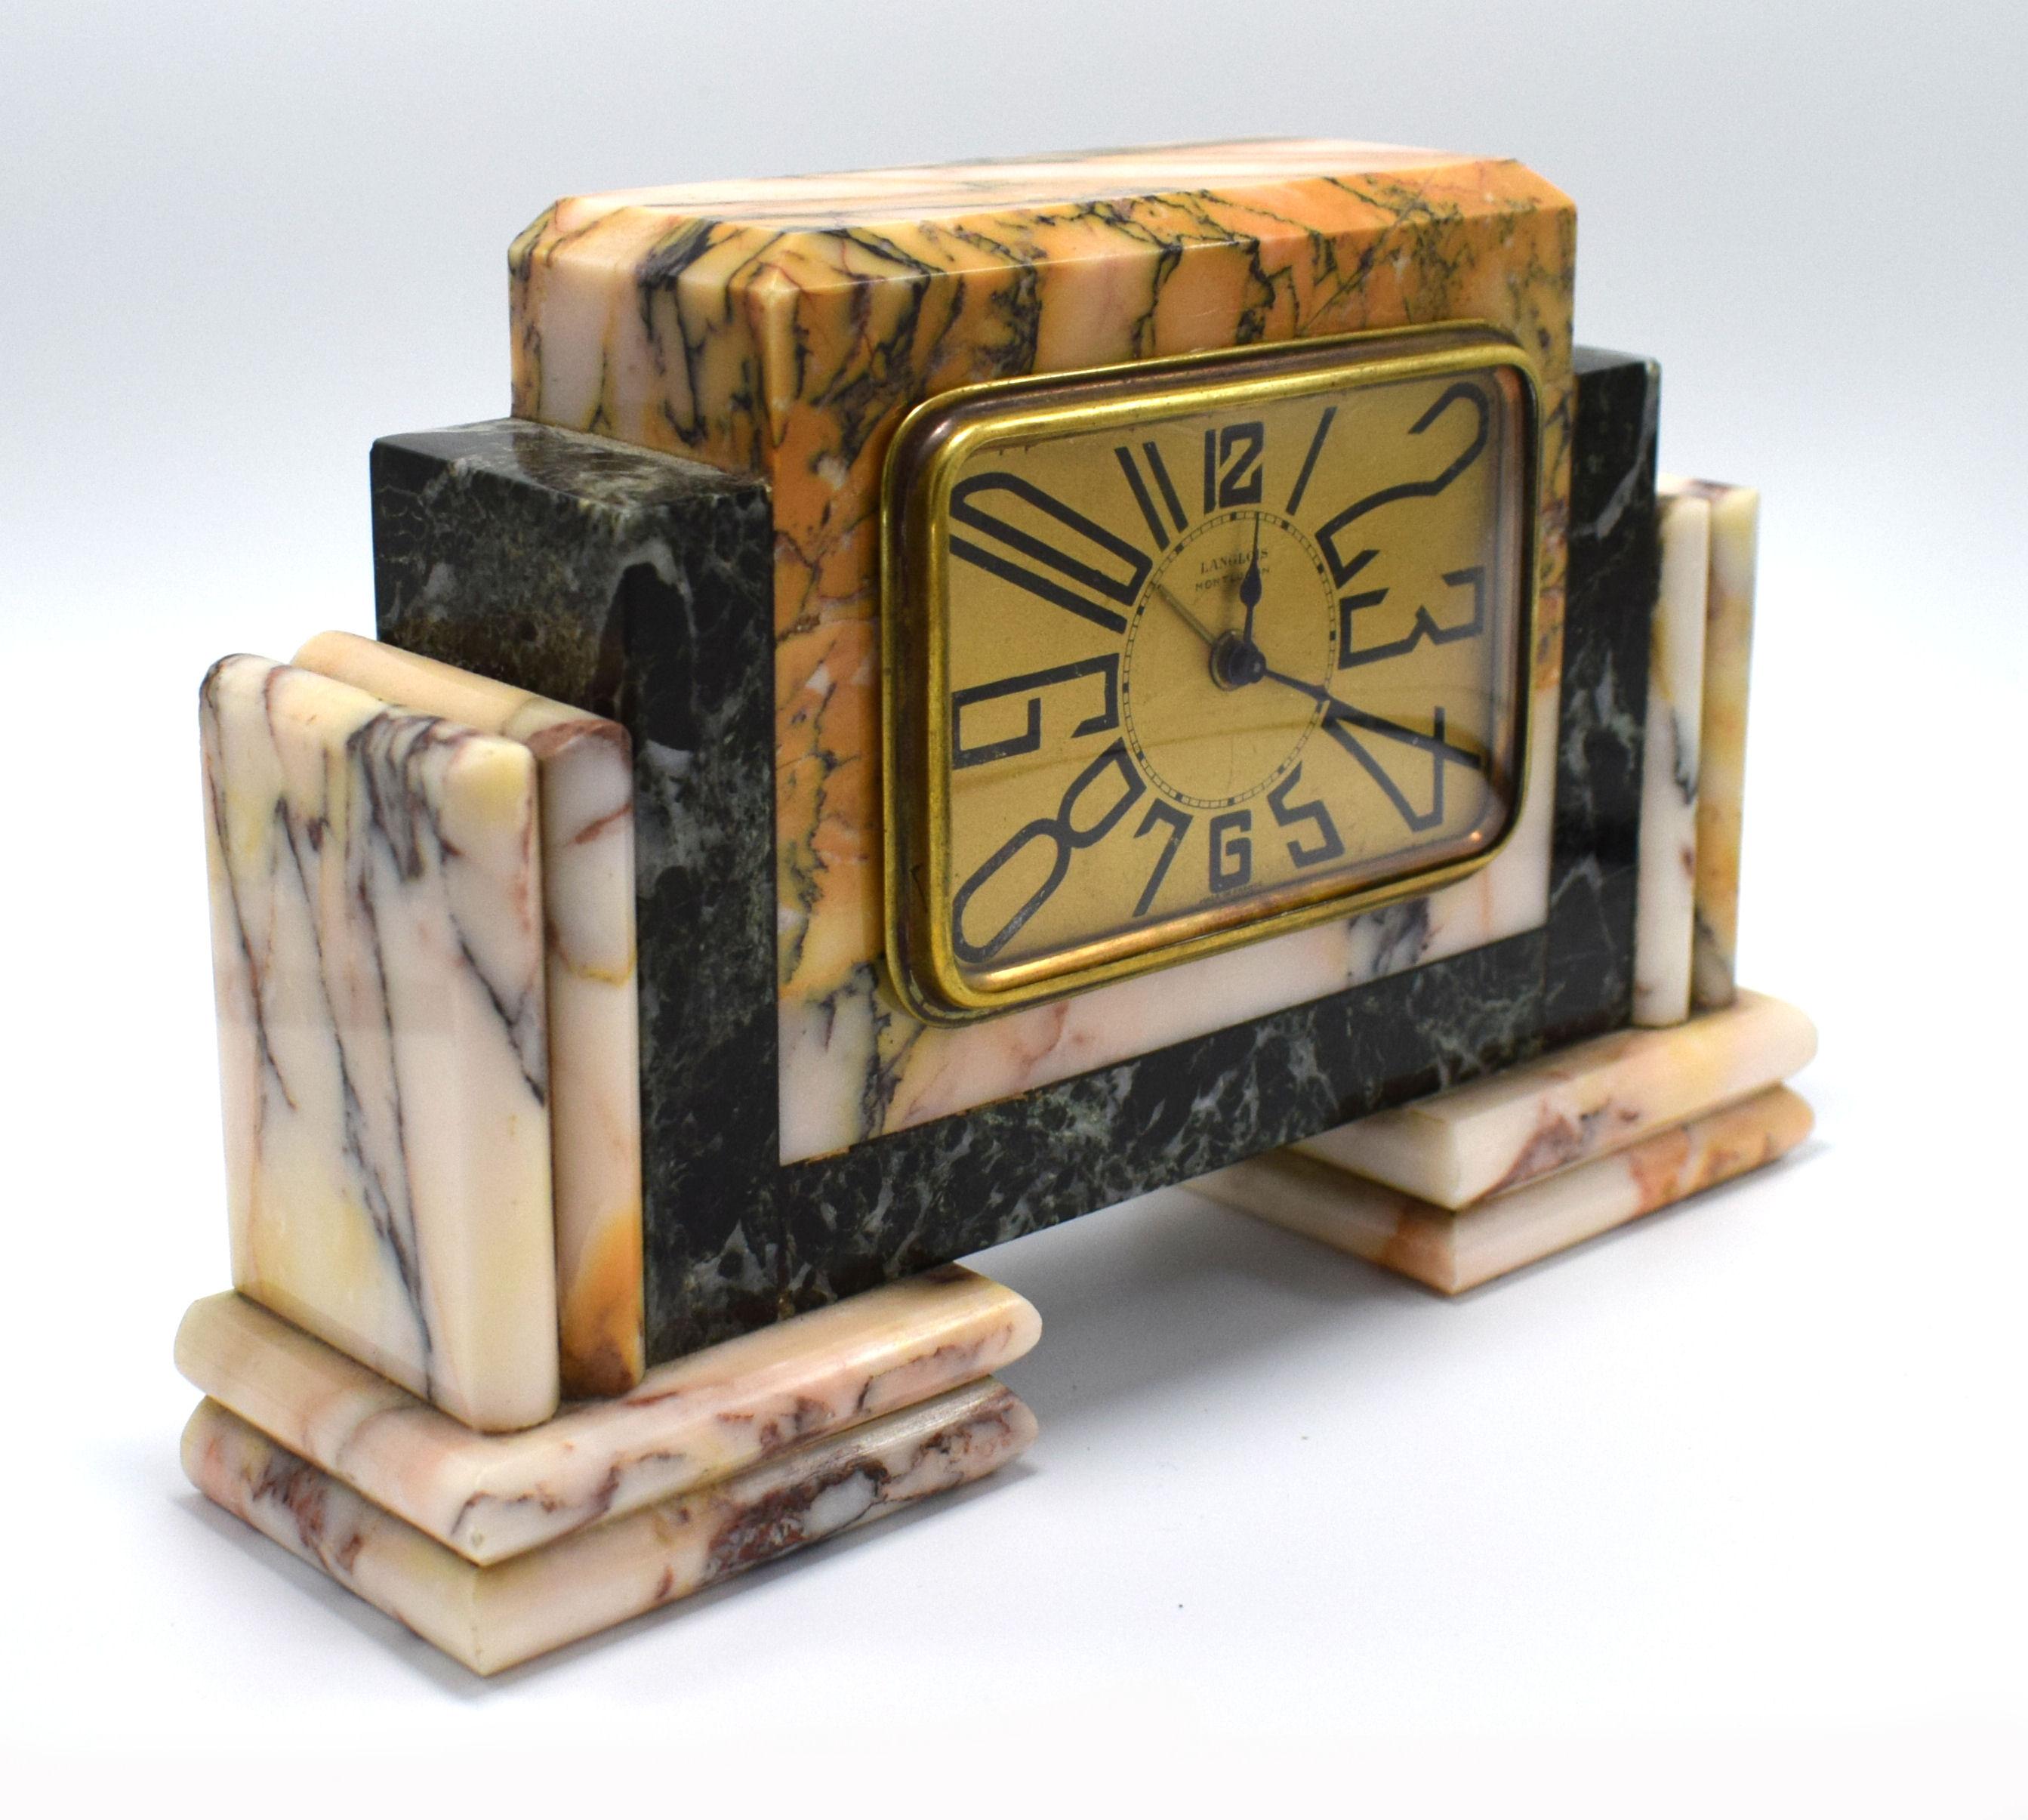 Very striking 1930s Art Deco French clock by Langlois. The case is solid multicoloured marble, the bezel and face are in gold tone metal. Very iconic Art Deco stretched numerals. This clock is a really cute size and ideal as a bedroom clock or side